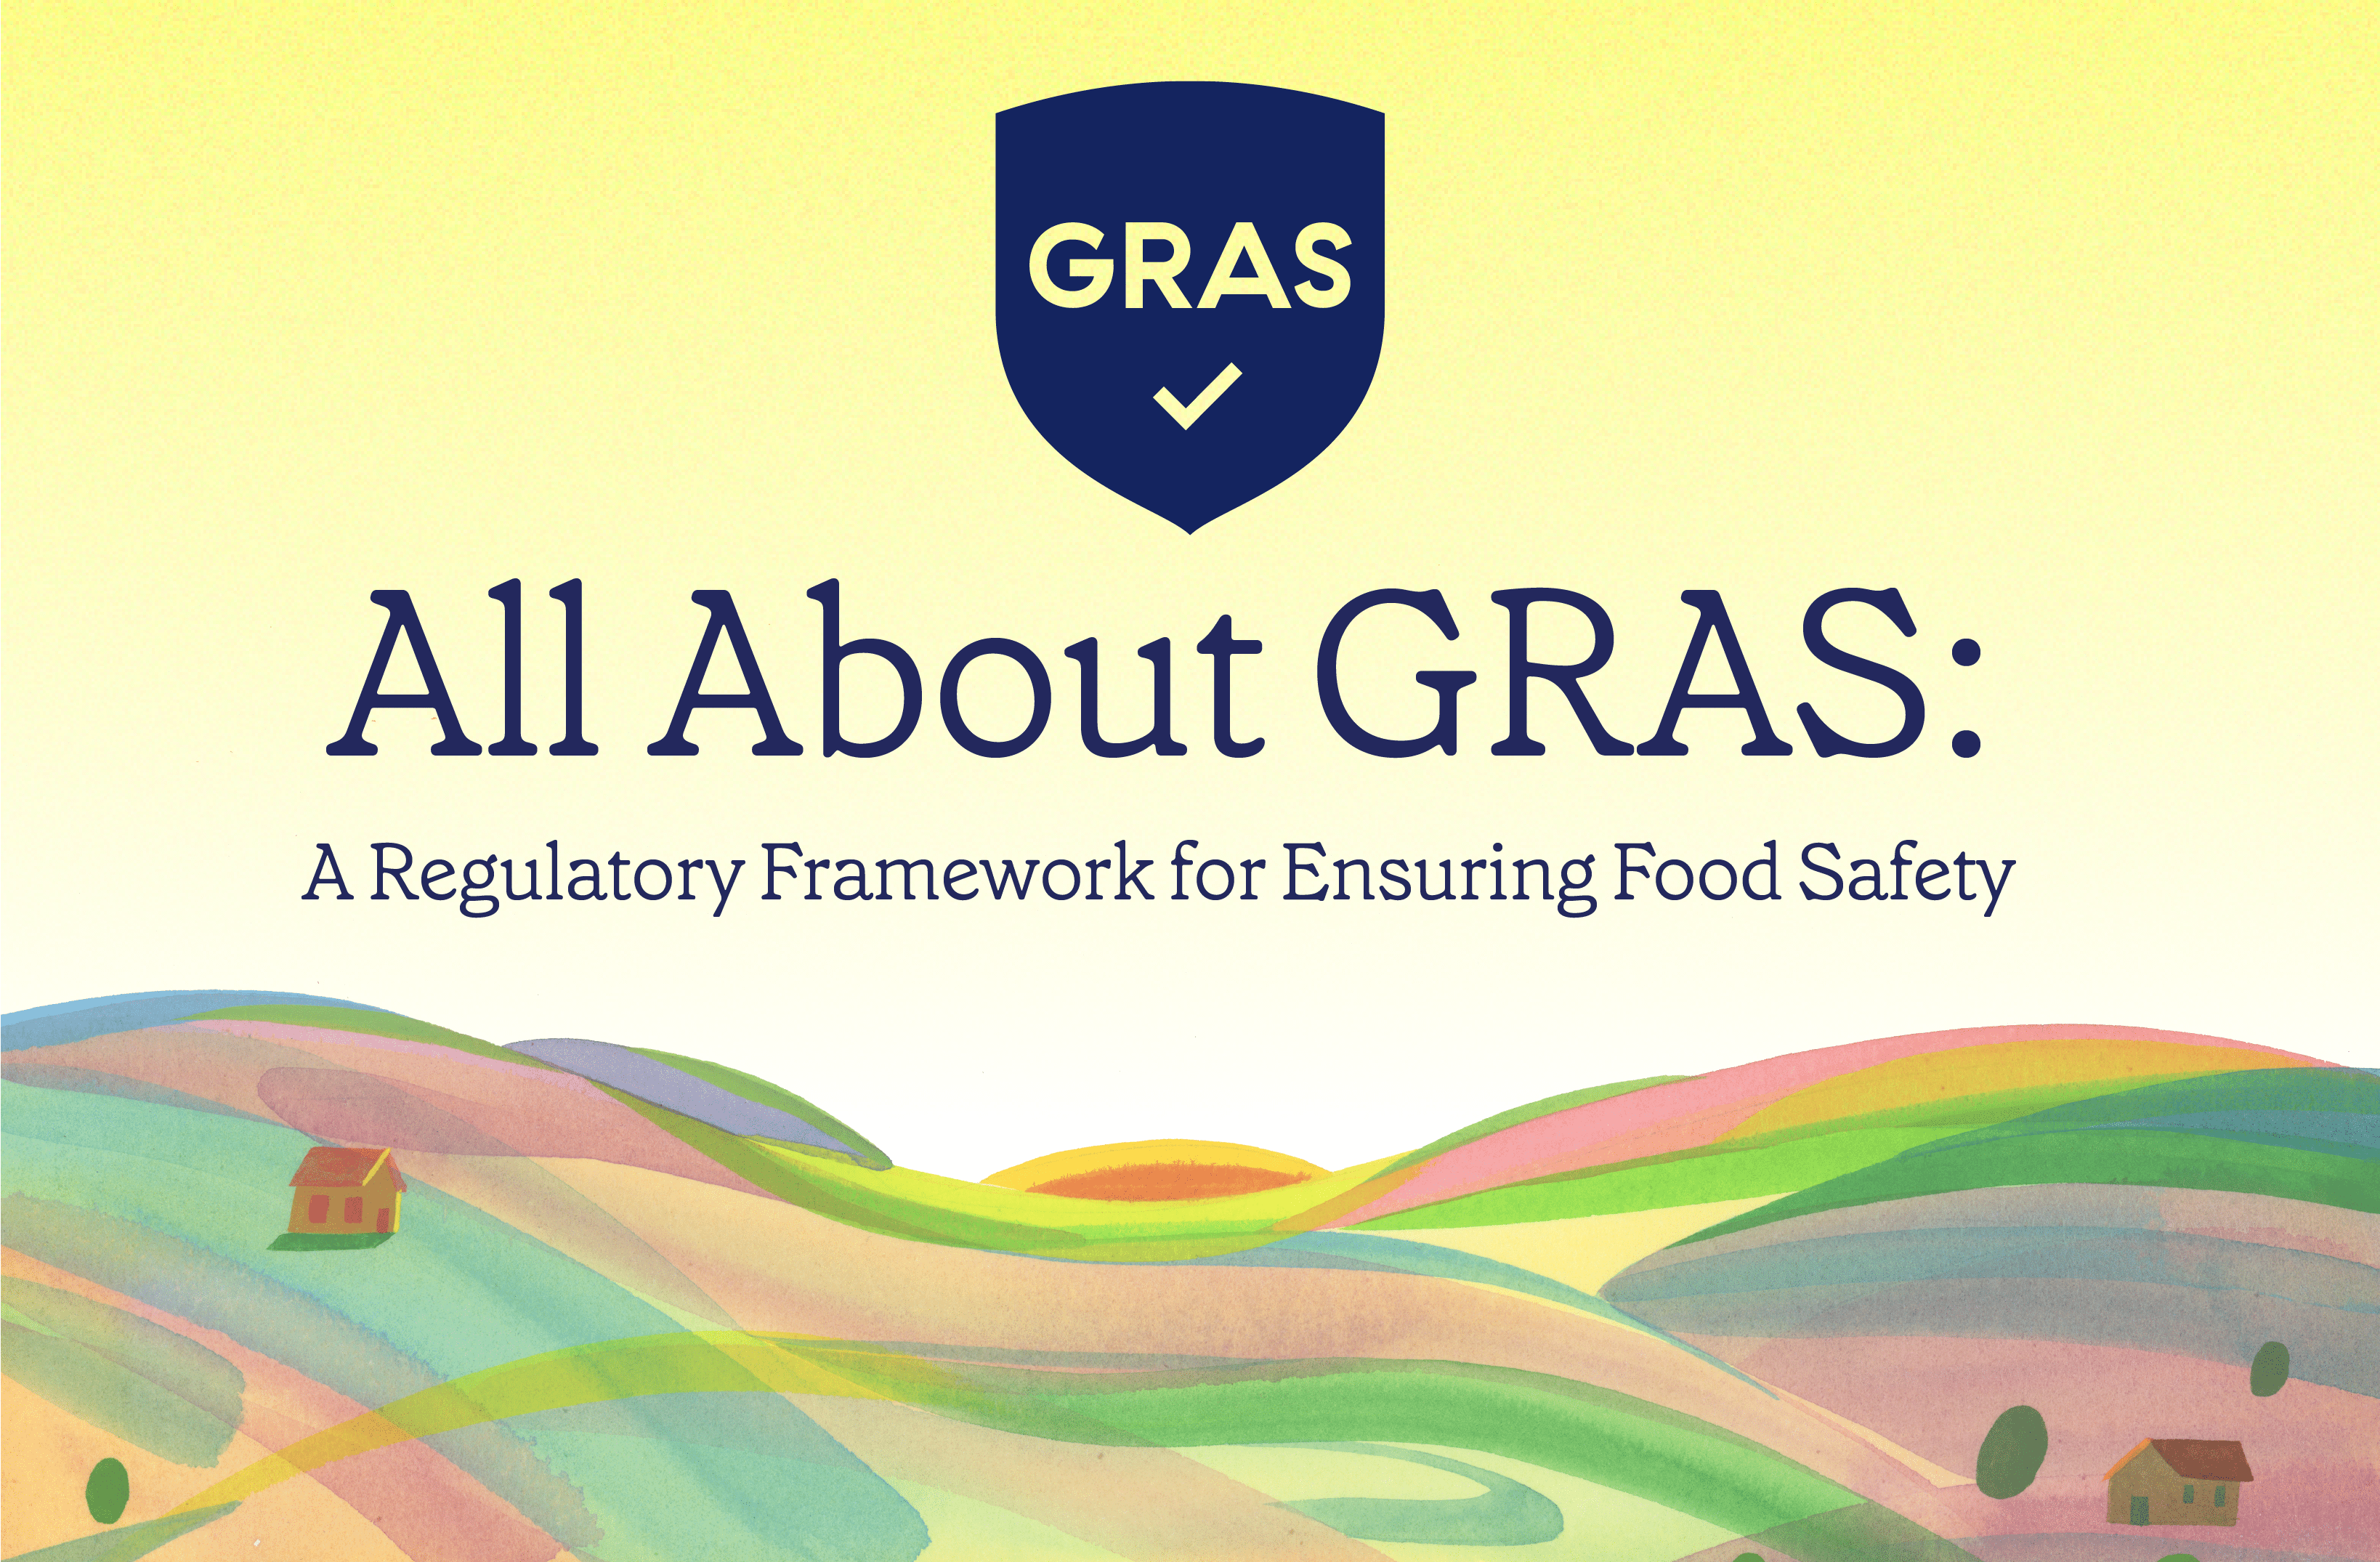 All About GRAS: A Regulatory Framework for Ensuring Food Safety. GRAS symbol above an illustration of colorful rolling hills.